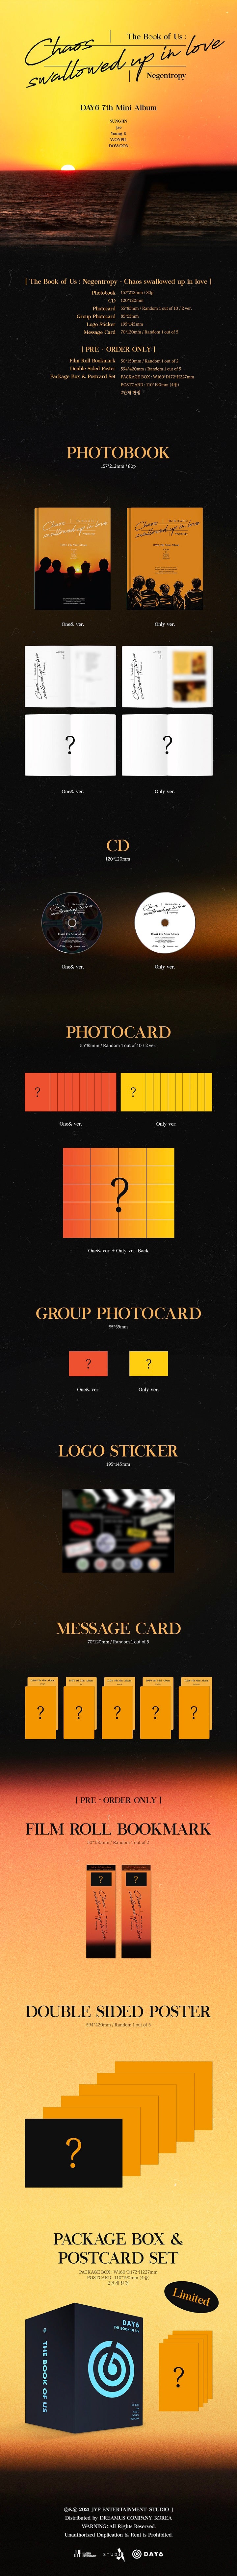 DAY6, released the 7th mini album 'The Book of Us : Negentropy - Chaos swallowed up in love' and the title song 'You make ...